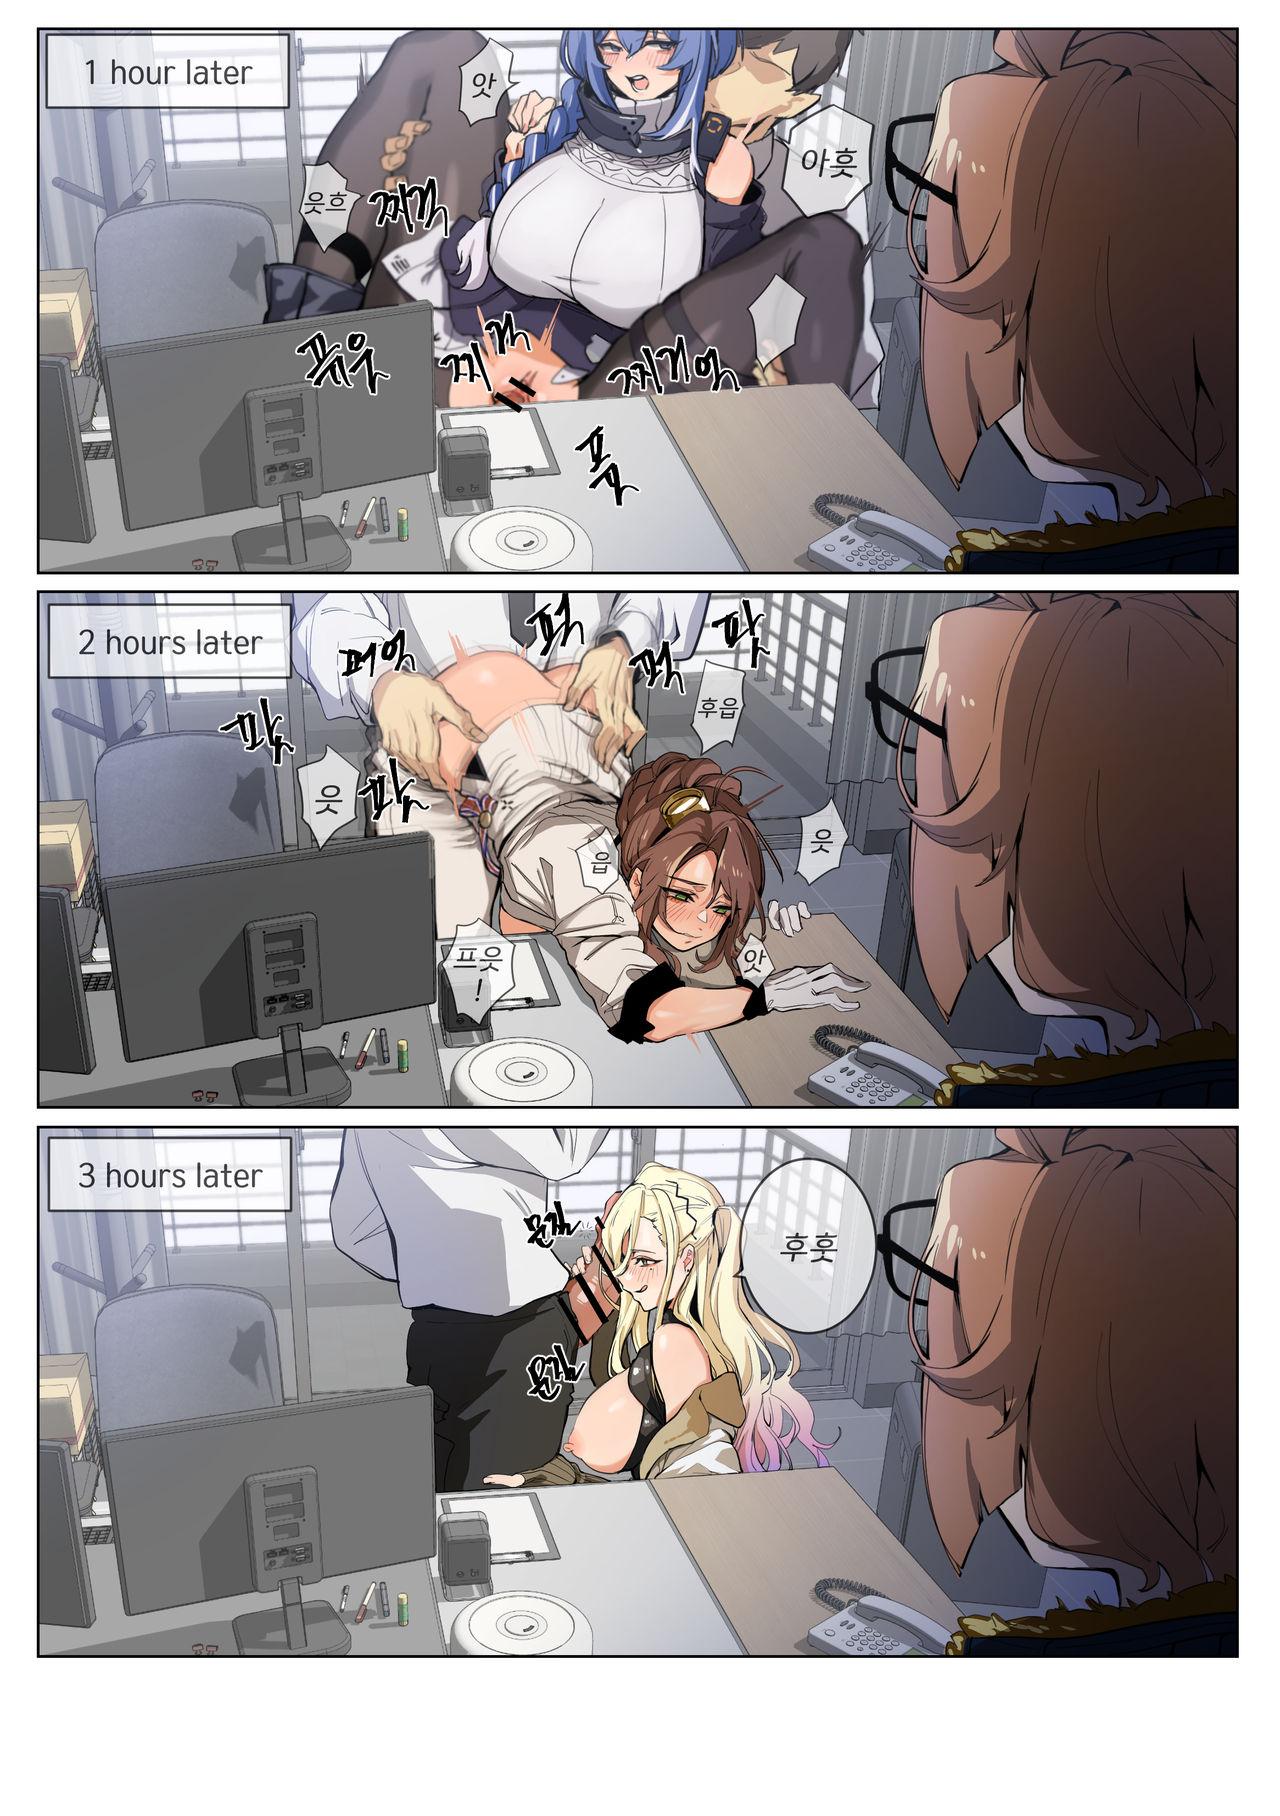 Vergon Grizzly - Girls frontline Pervert - Page 4